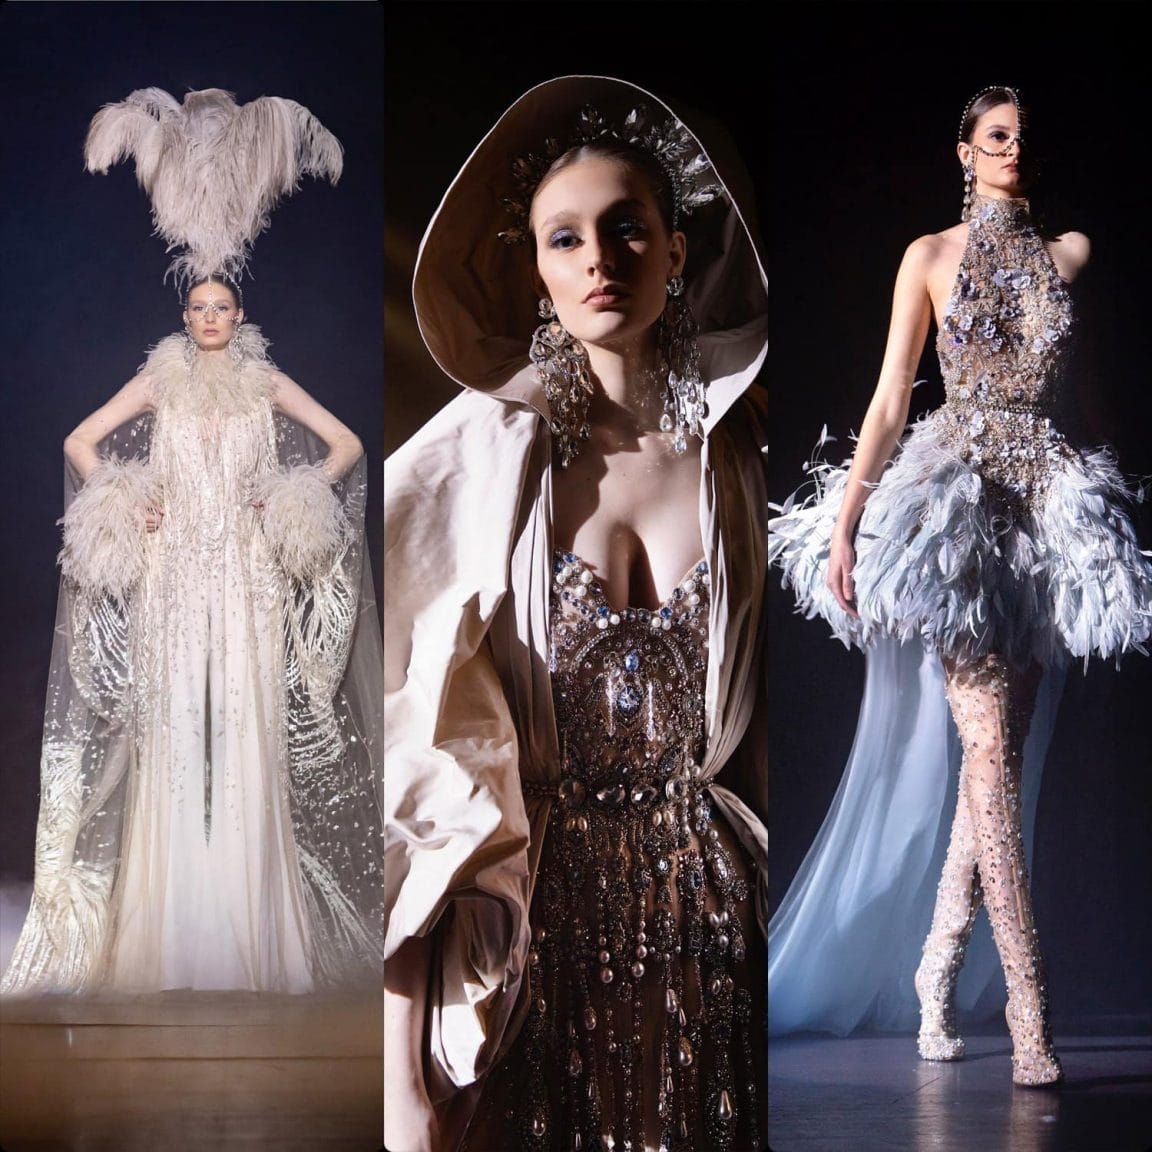 Elie Saab Haute Couture Spring Summer 2021 - RUNWAY MAGAZINE ® Collections